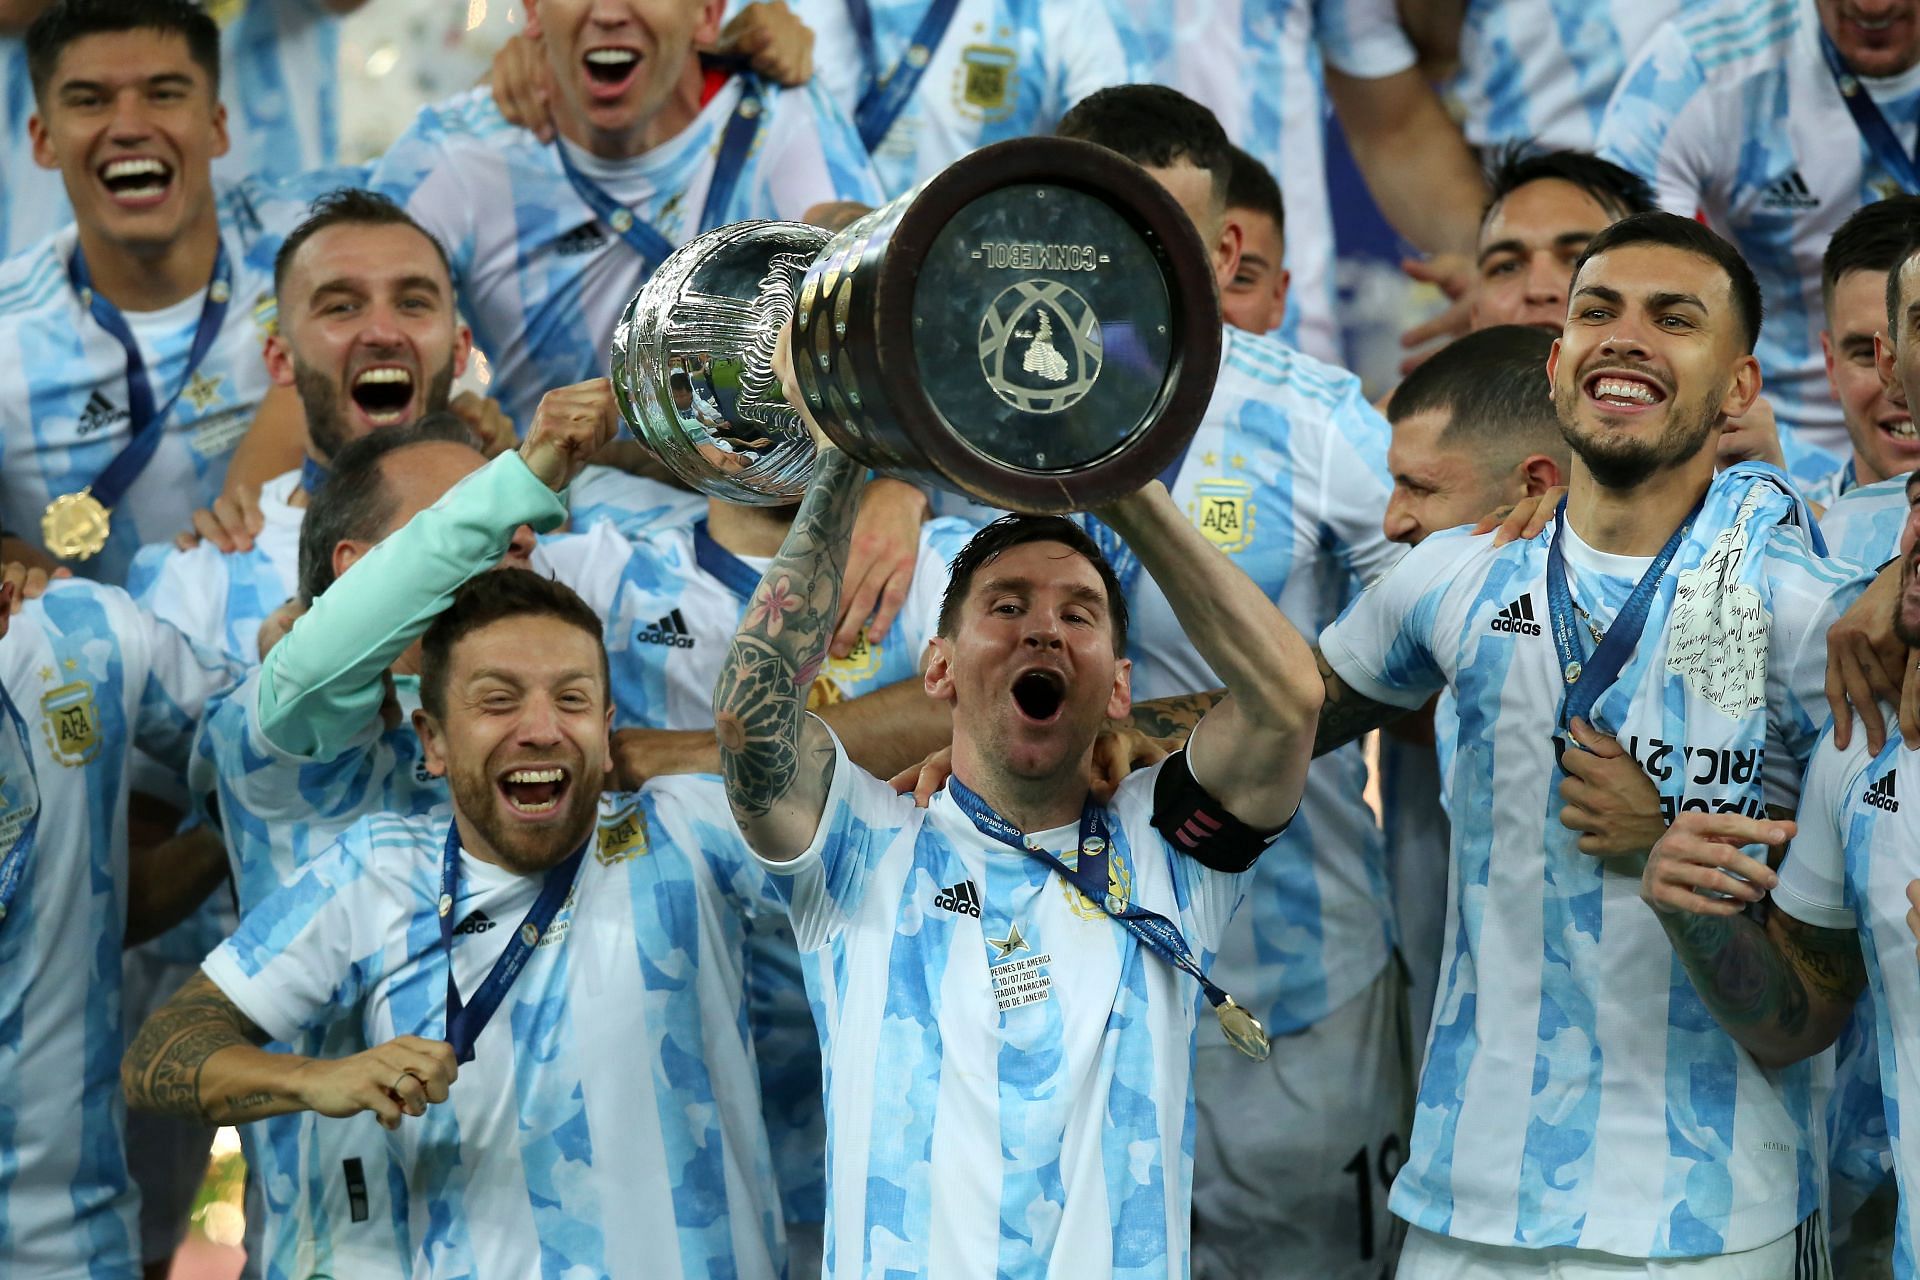 Can Argentina win their third honor in the space of two years by winning the World Cup in Qatar?